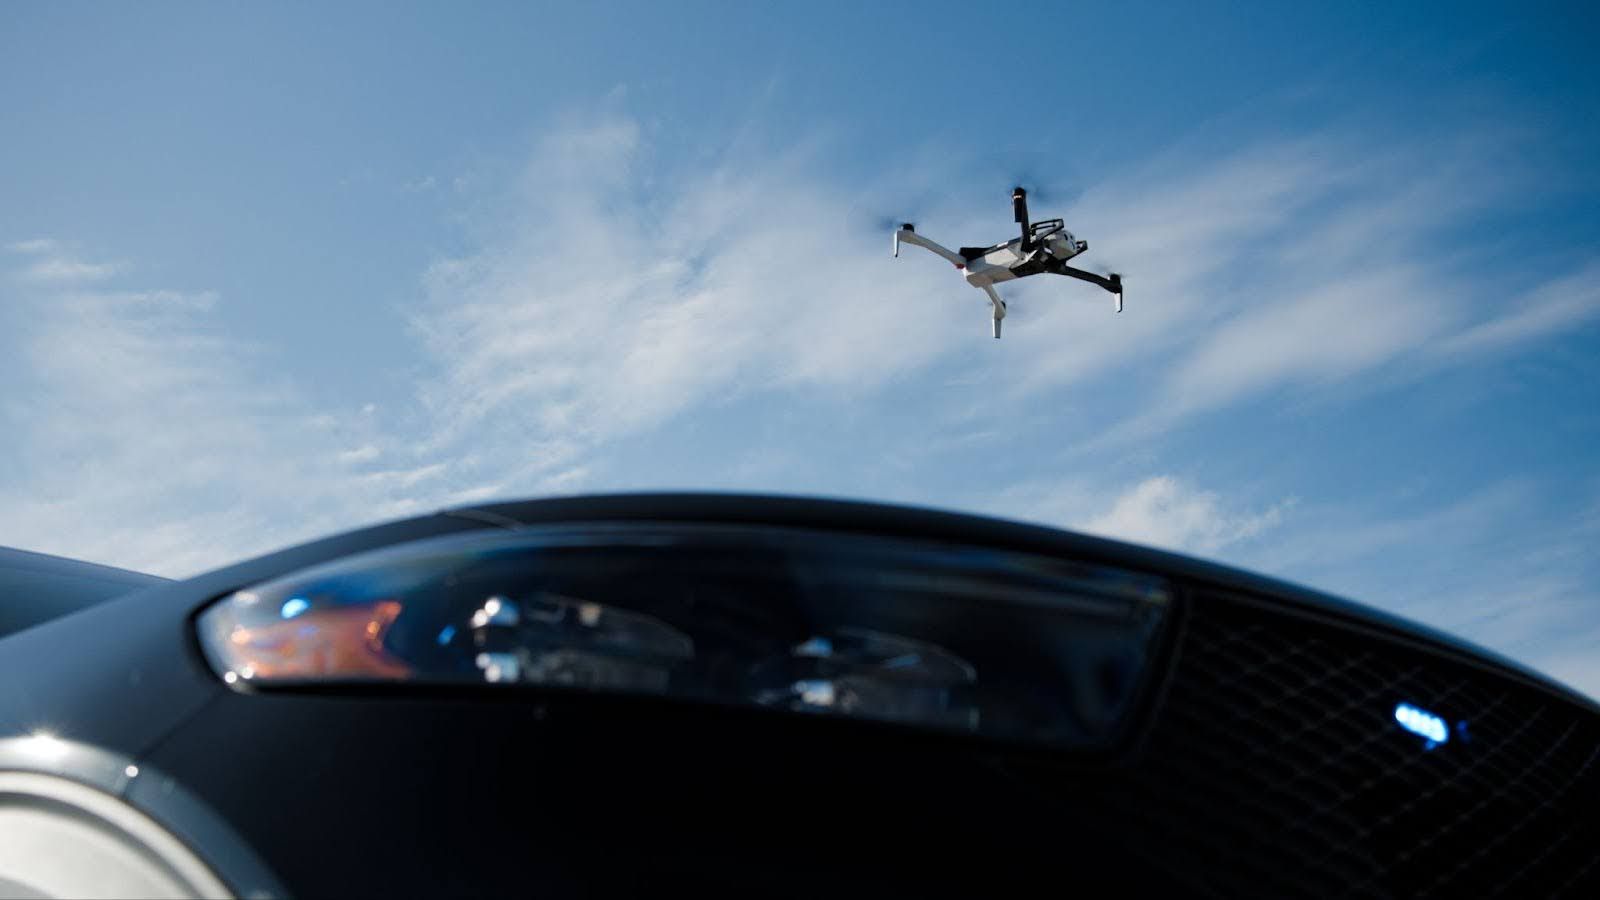 Skydio X10 DRONE AS FIRST RESPONDER (DFR)